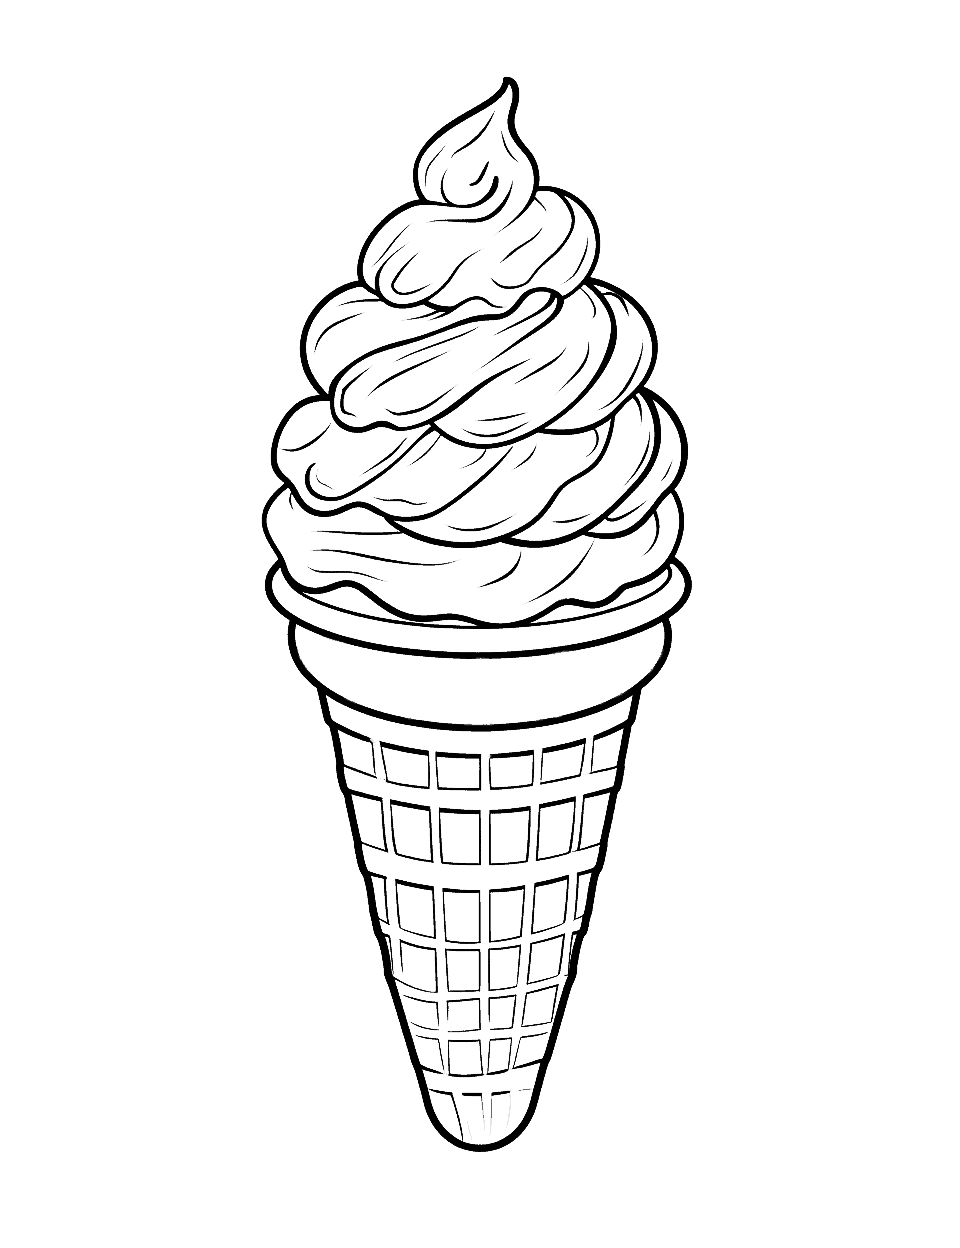 Ice Cream Tower Coloring Page - A towering ice cream cone with scoops of many colors.